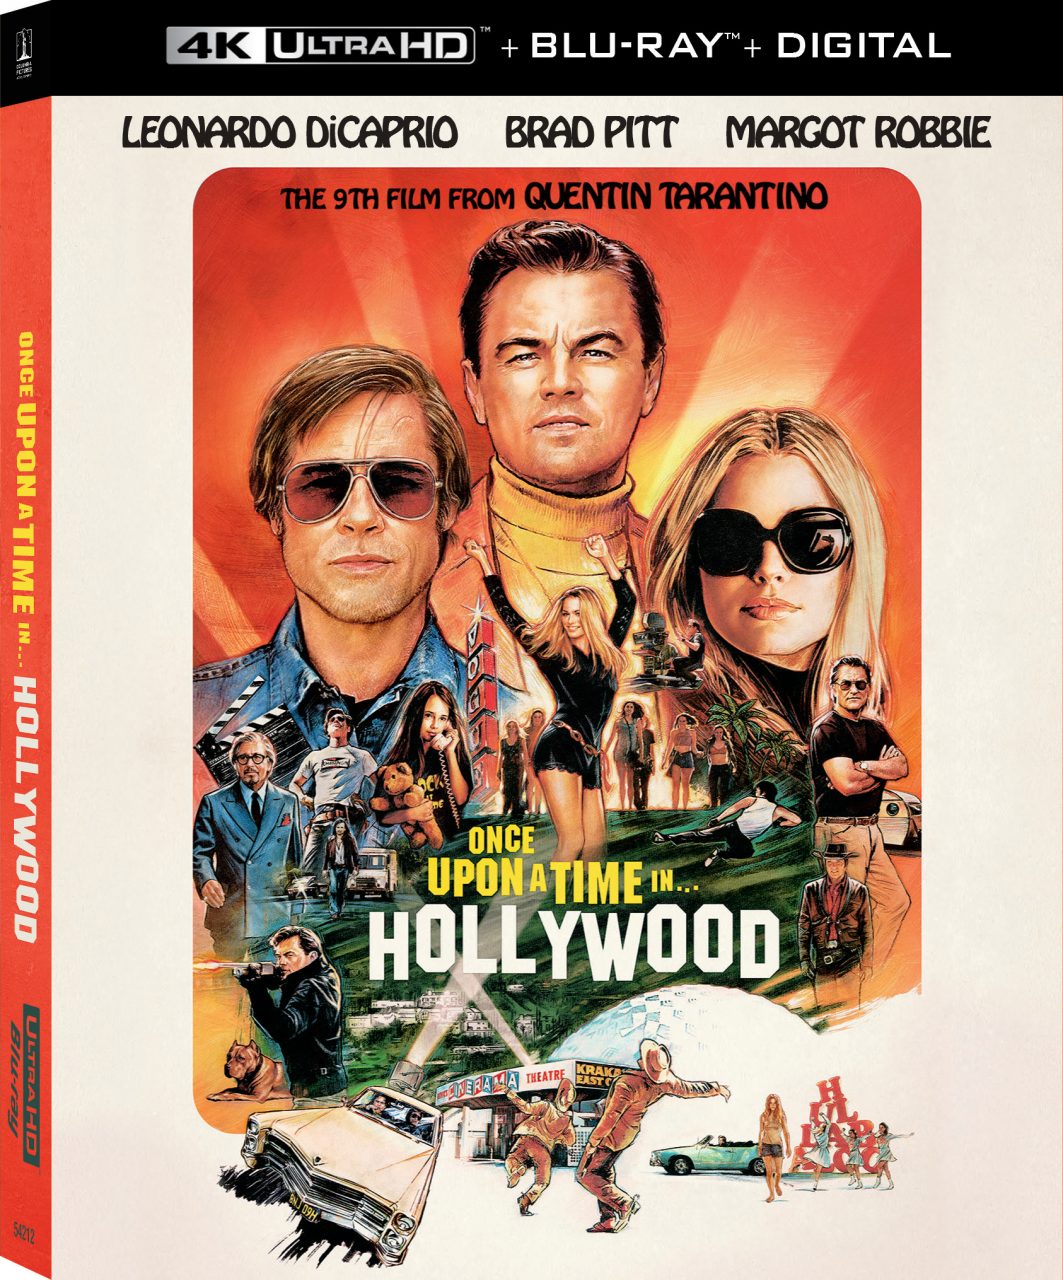 Once Upon A Time In Hollywood 4K Ultra HD Combo Pack (Sony Pictures)